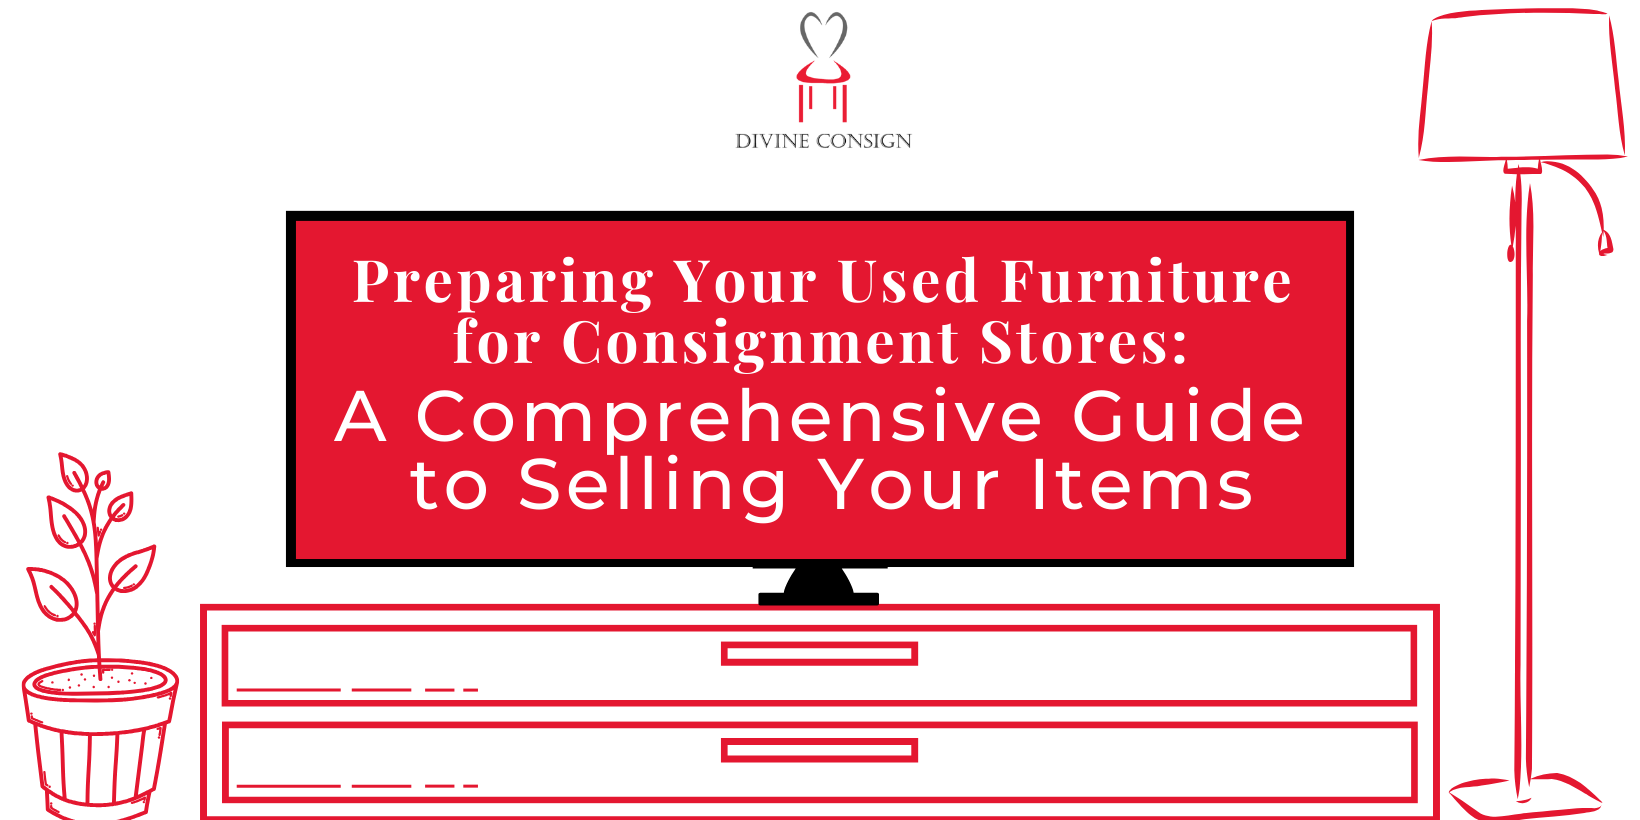 Preparing Your Used Furniture for Consignment Stores: A Comprehensive Guide to Selling Your Items